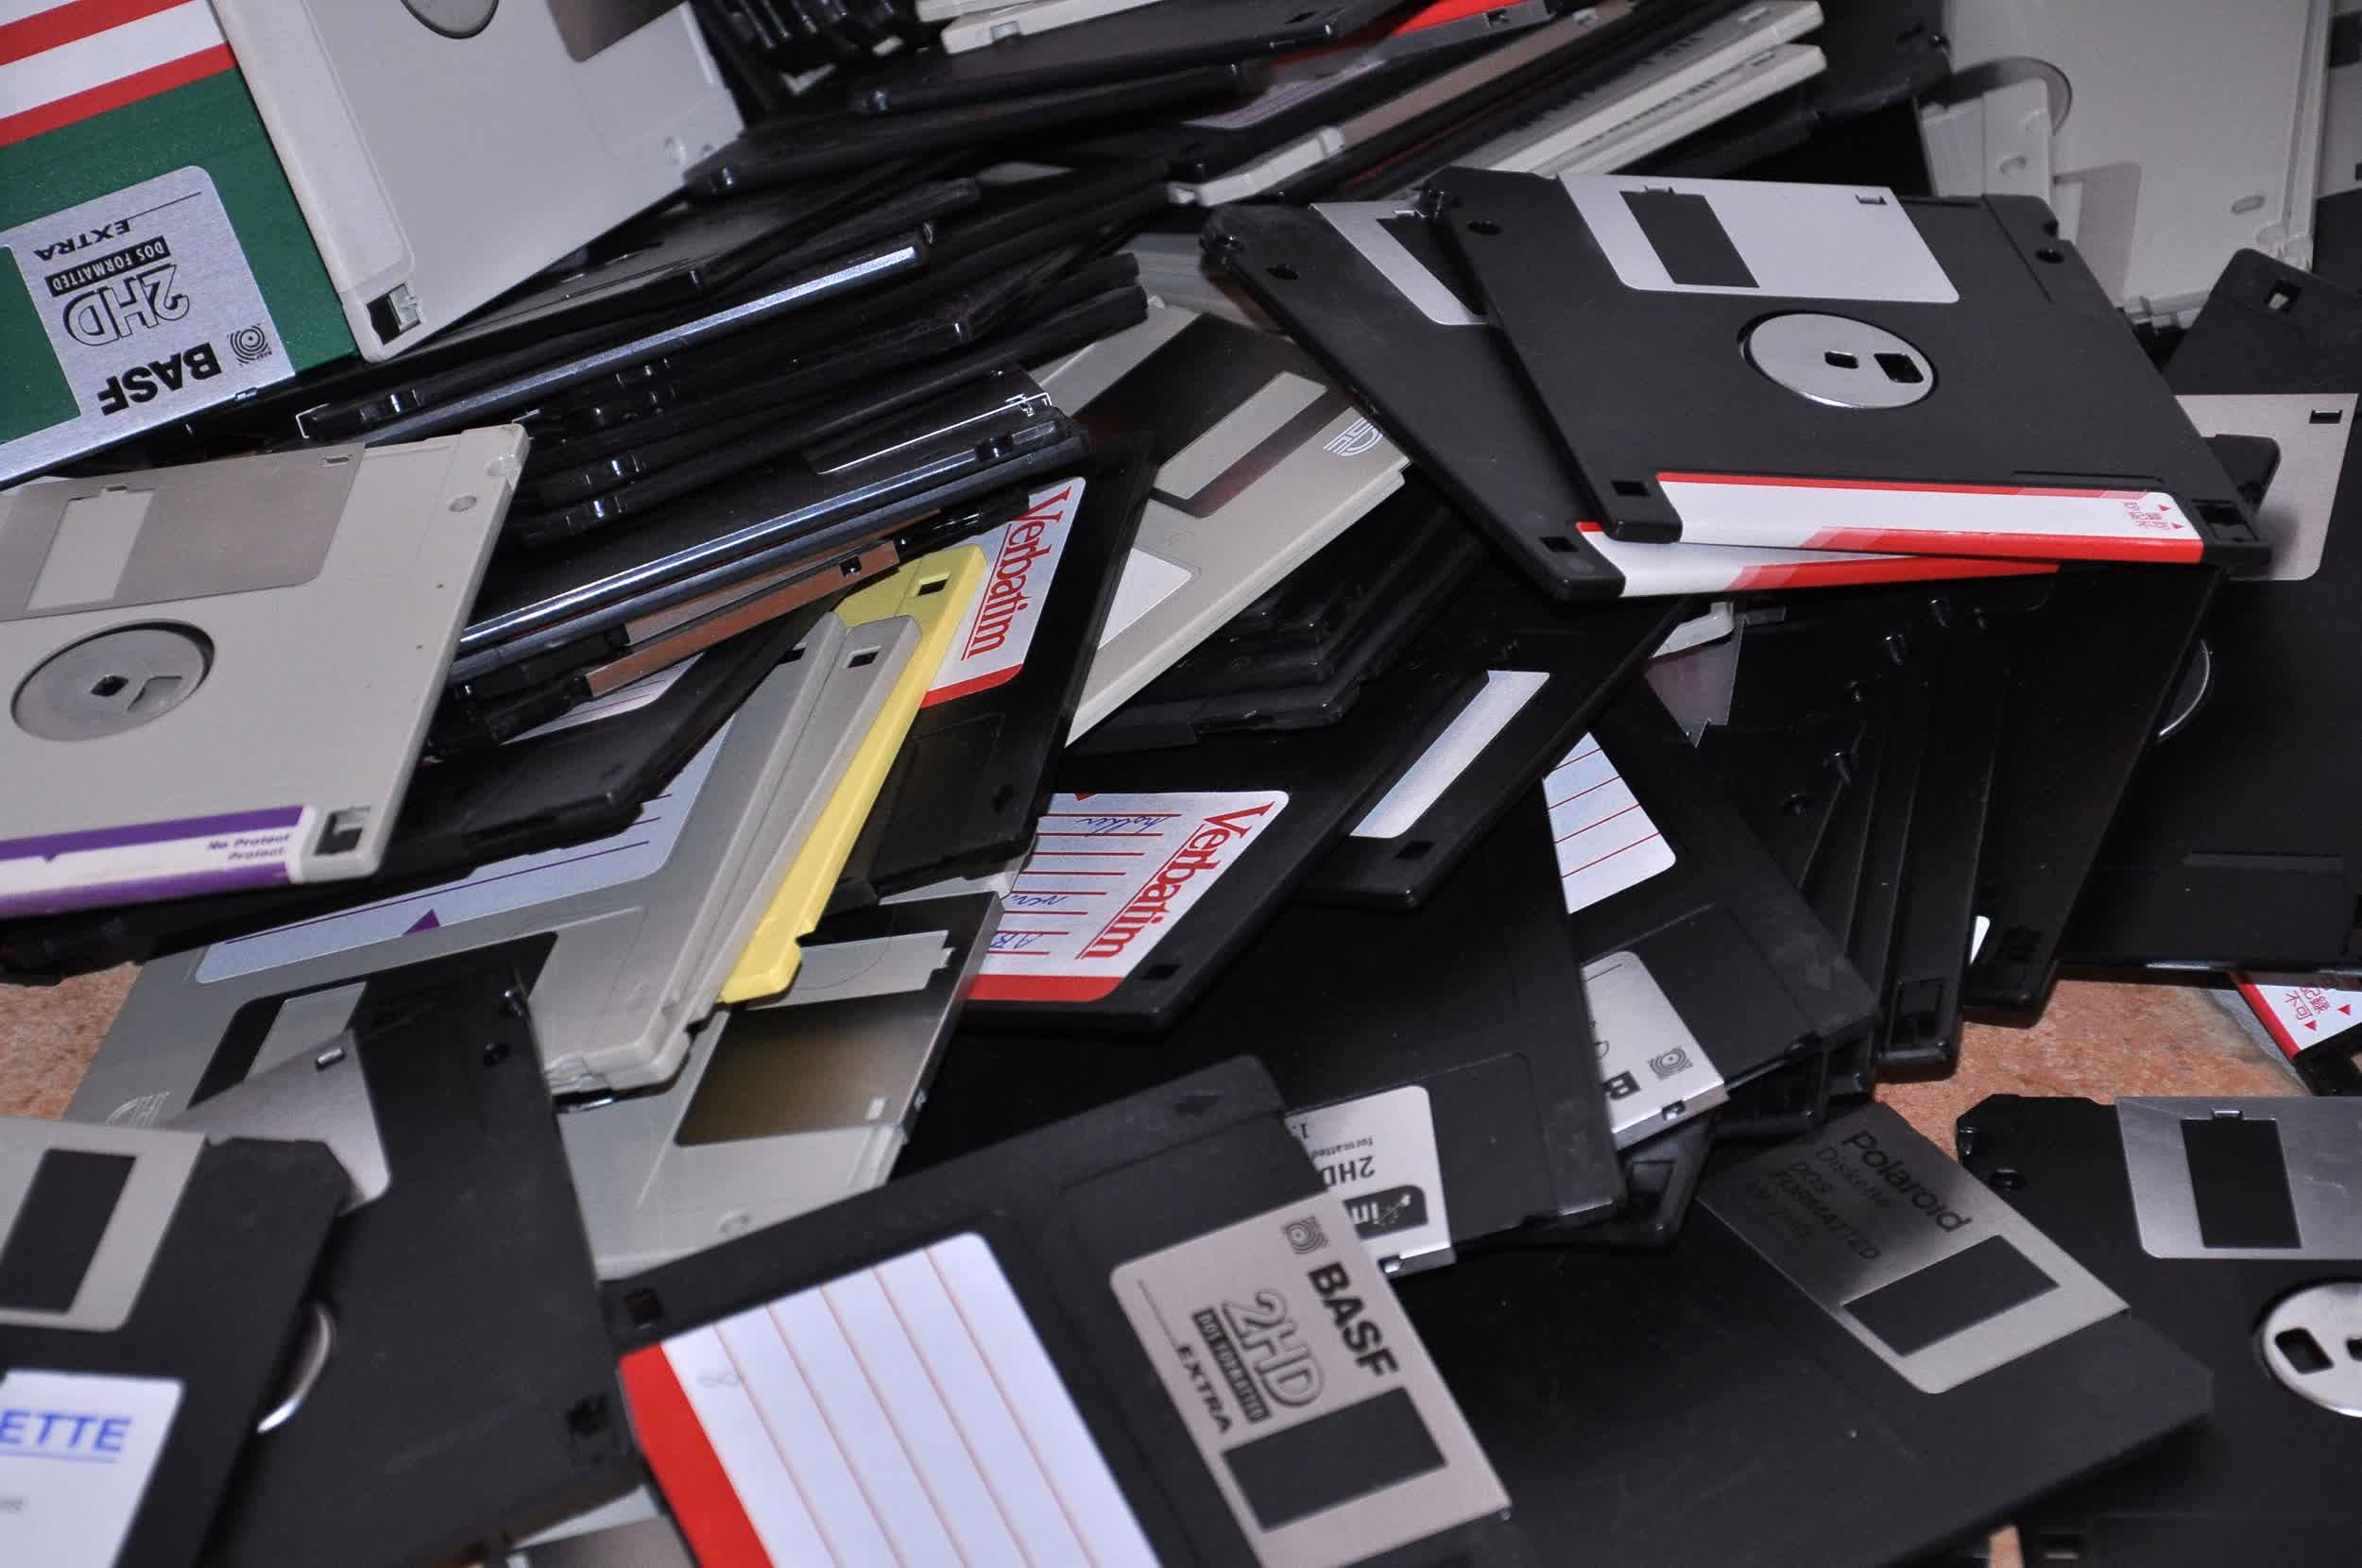 From Chuck E. Cheese to Boeing 747s, the floppy disk lives on